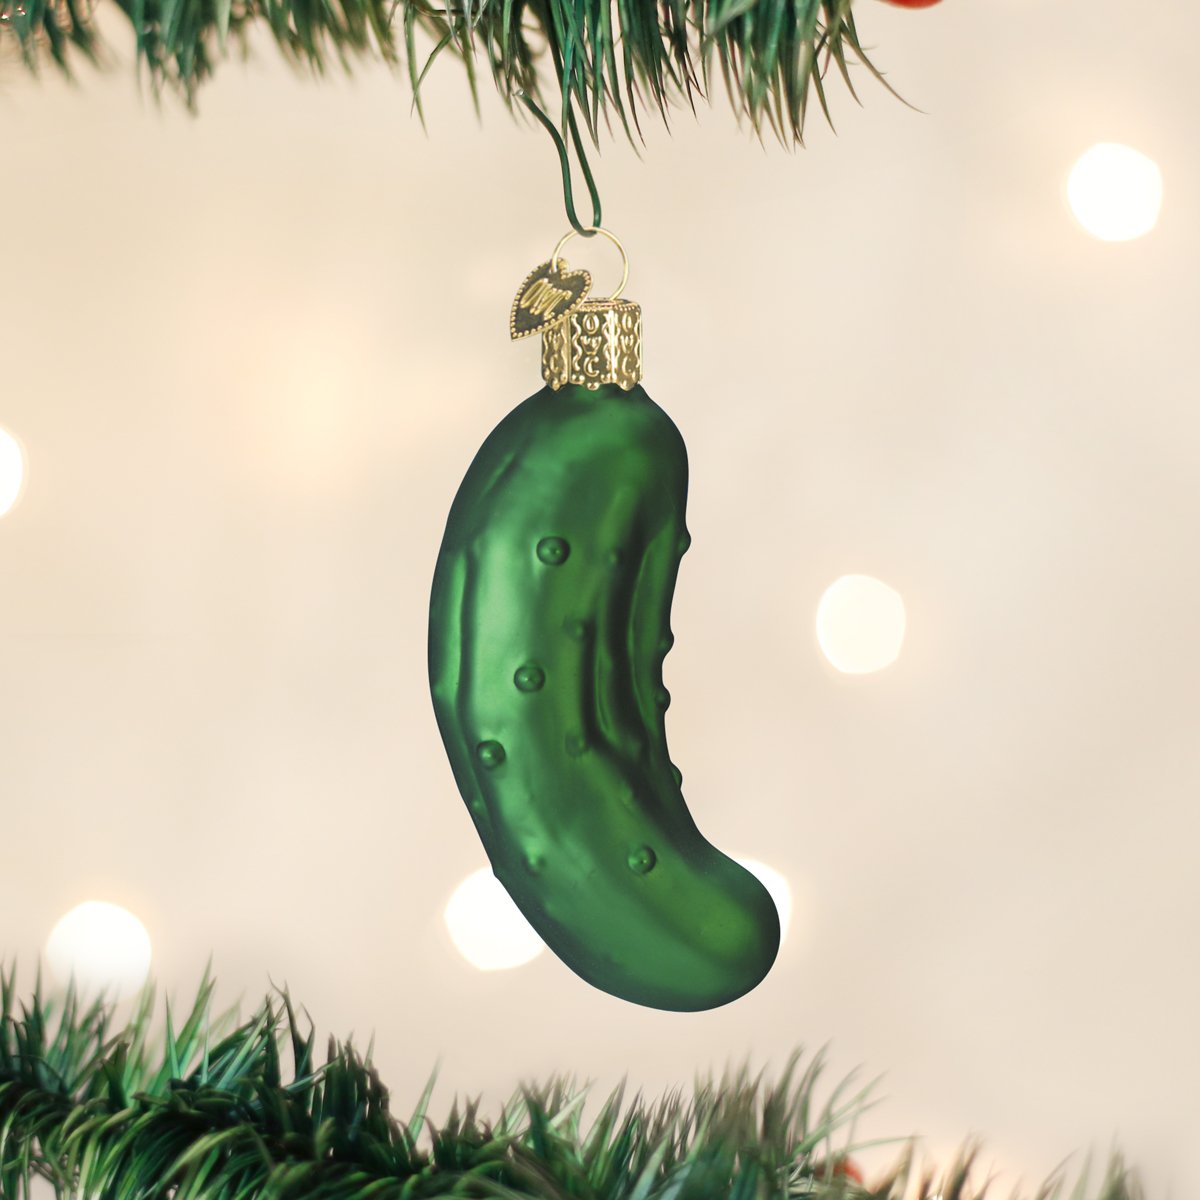 Old World Christmas - The Pickle Ornament    